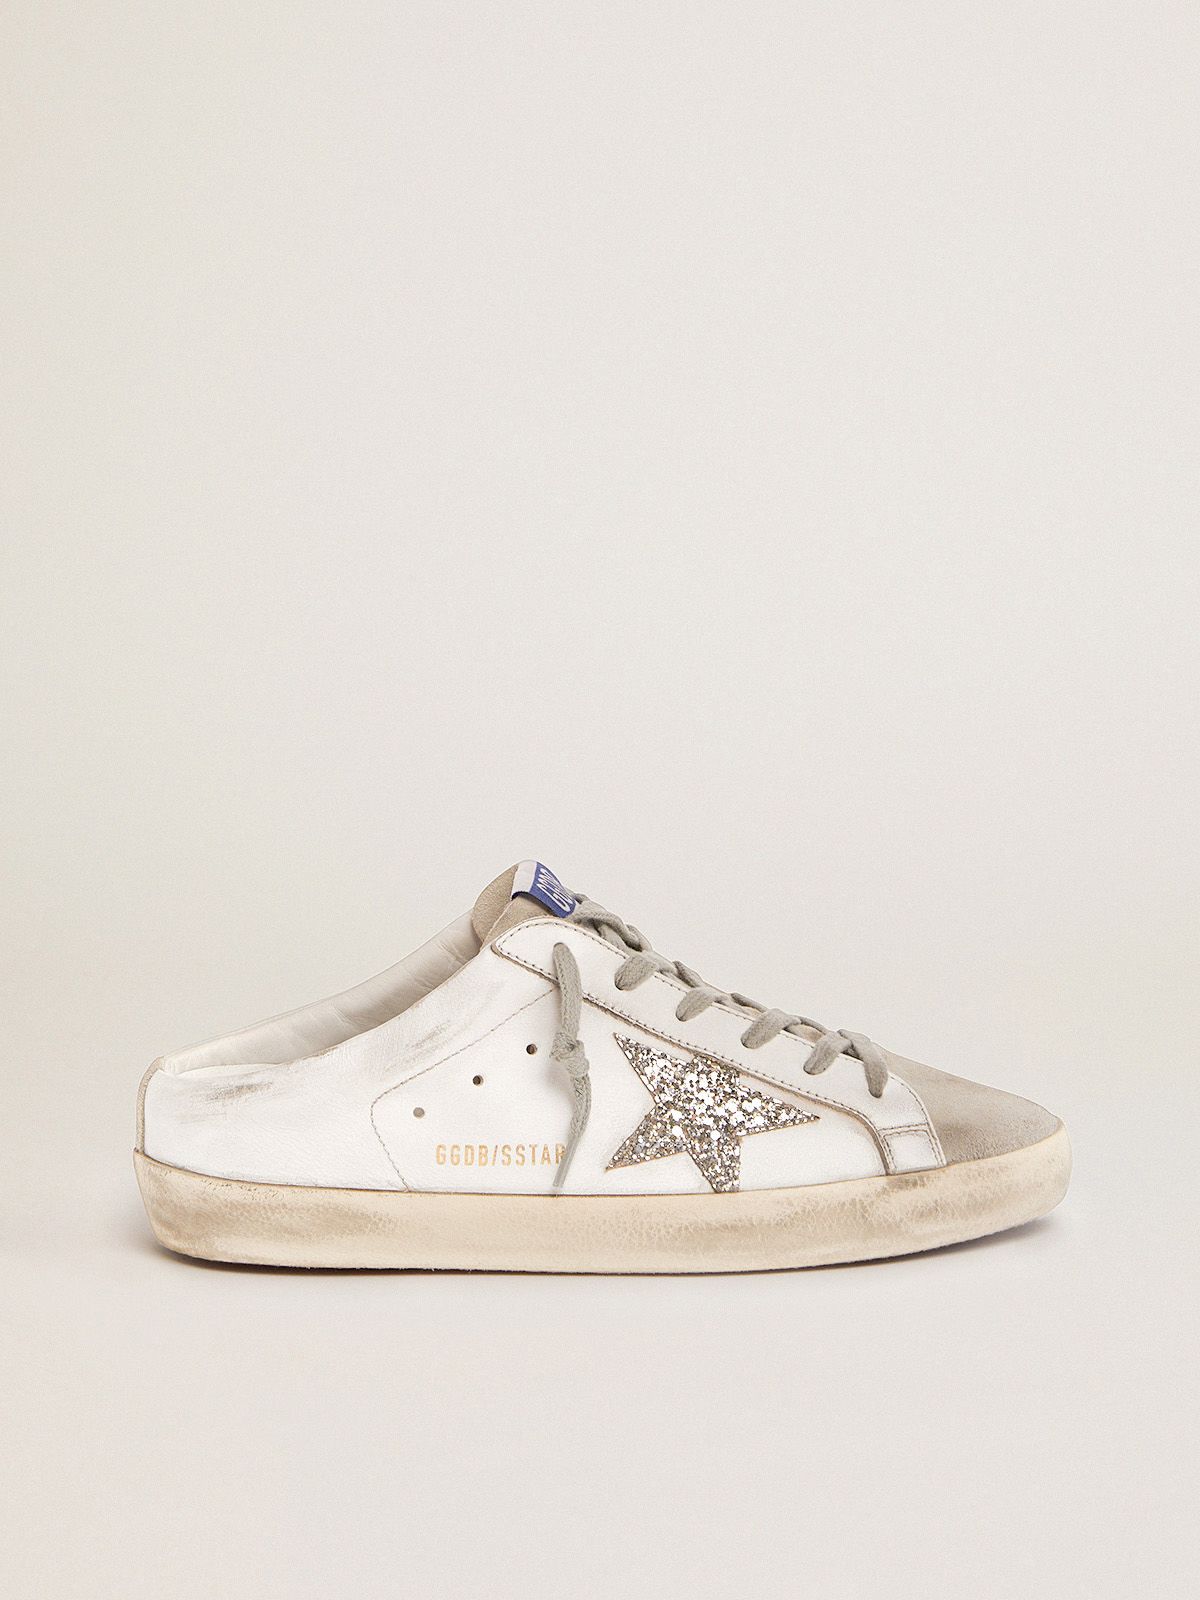 golden goose Super-Star gray Sabots suede glitter silver in and leather with star white